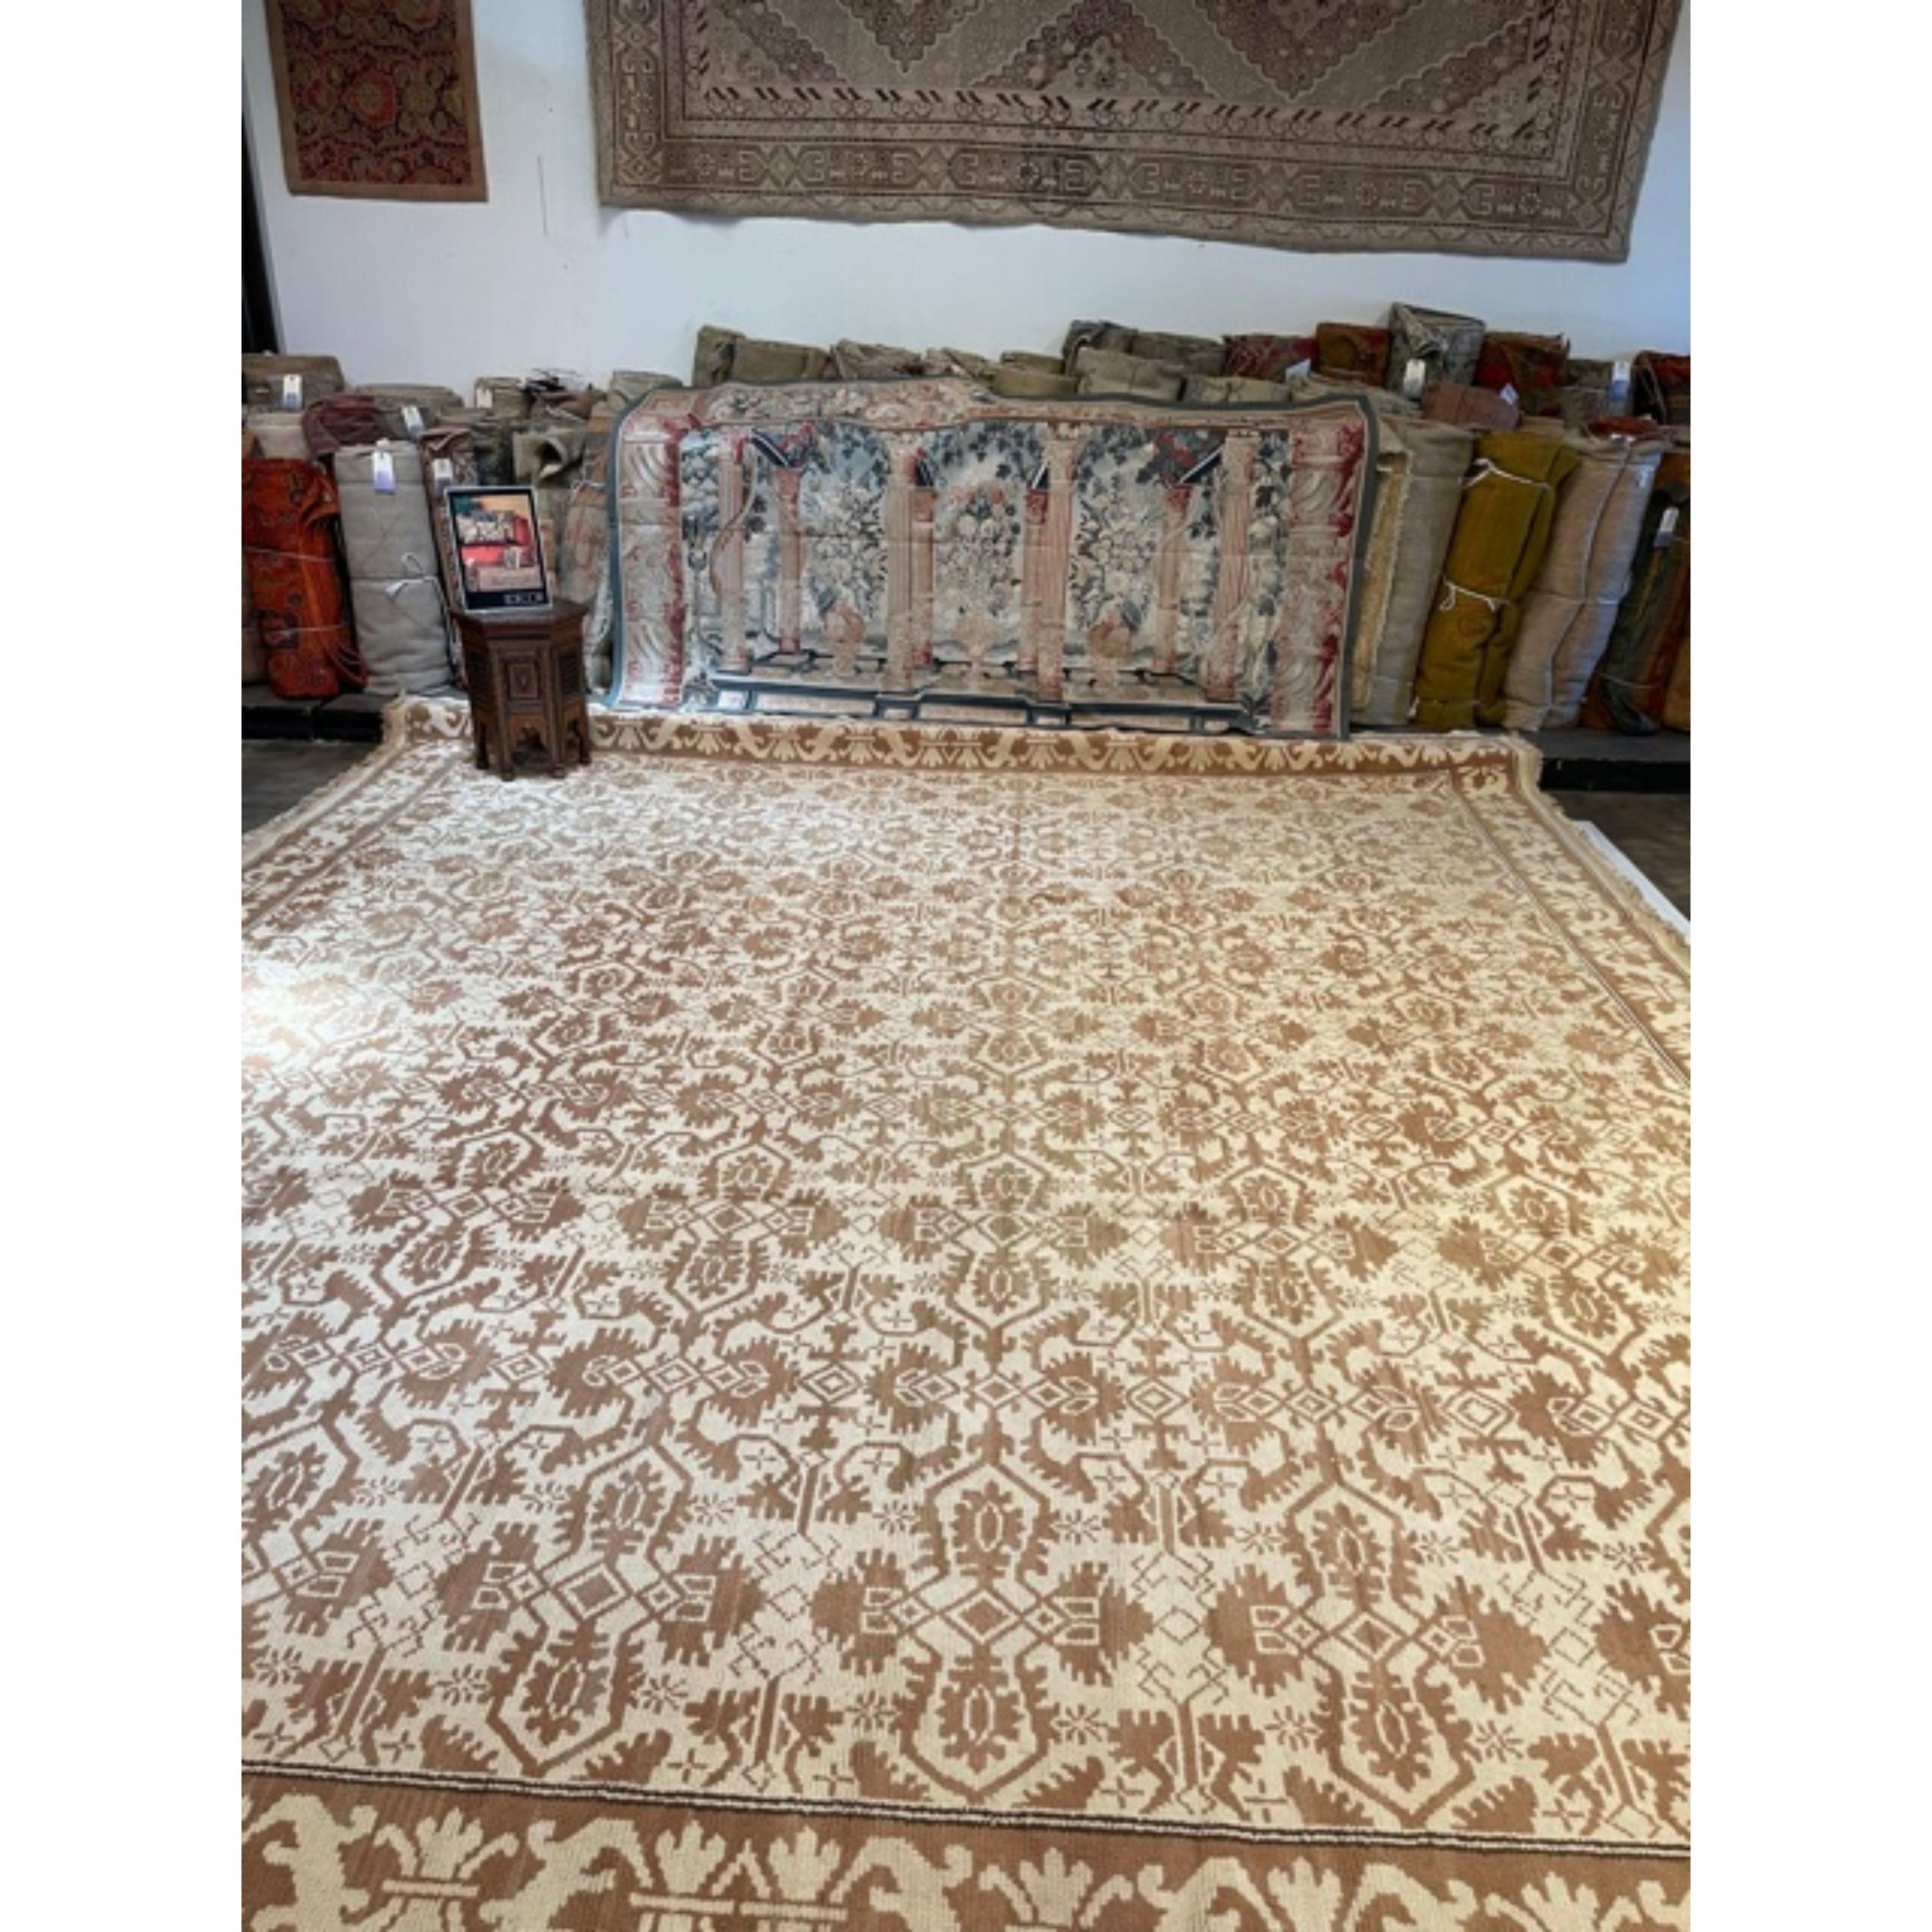 Spanish Rugs – Although Spain is not generally thought of as a rug producing region, Spanish rugs represent the most venerable and honored tradition of rug production in Europe, going back to the time when much of Spain was part of the Islamic